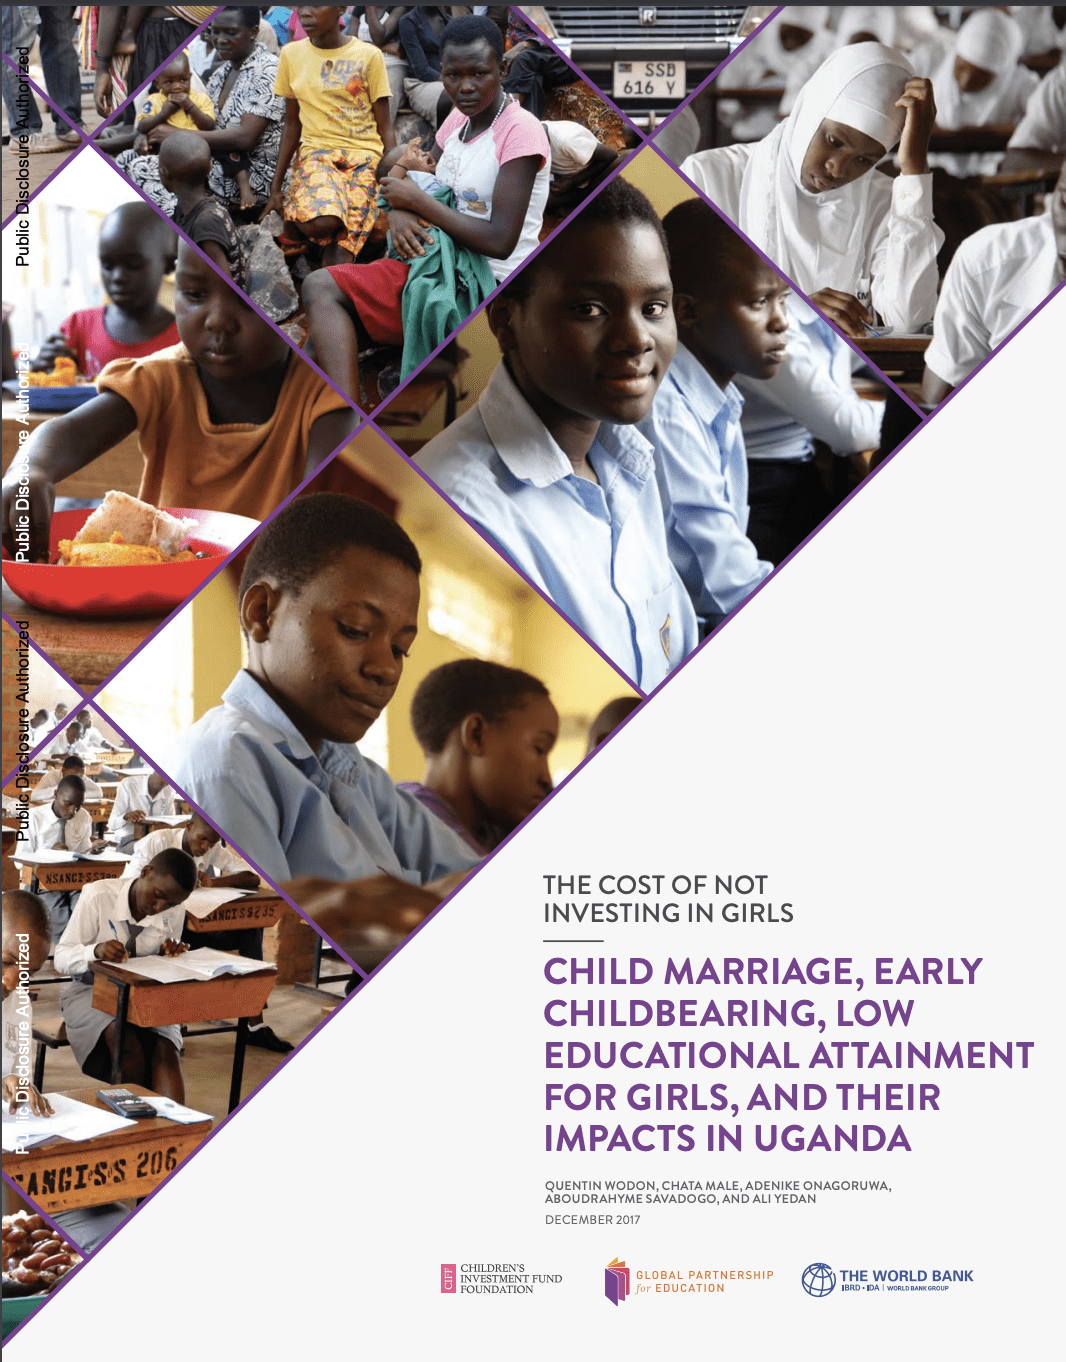 Child Marriage, Early Childbearing, Low Educational Attainment for girls, and their Impacts in Uganda